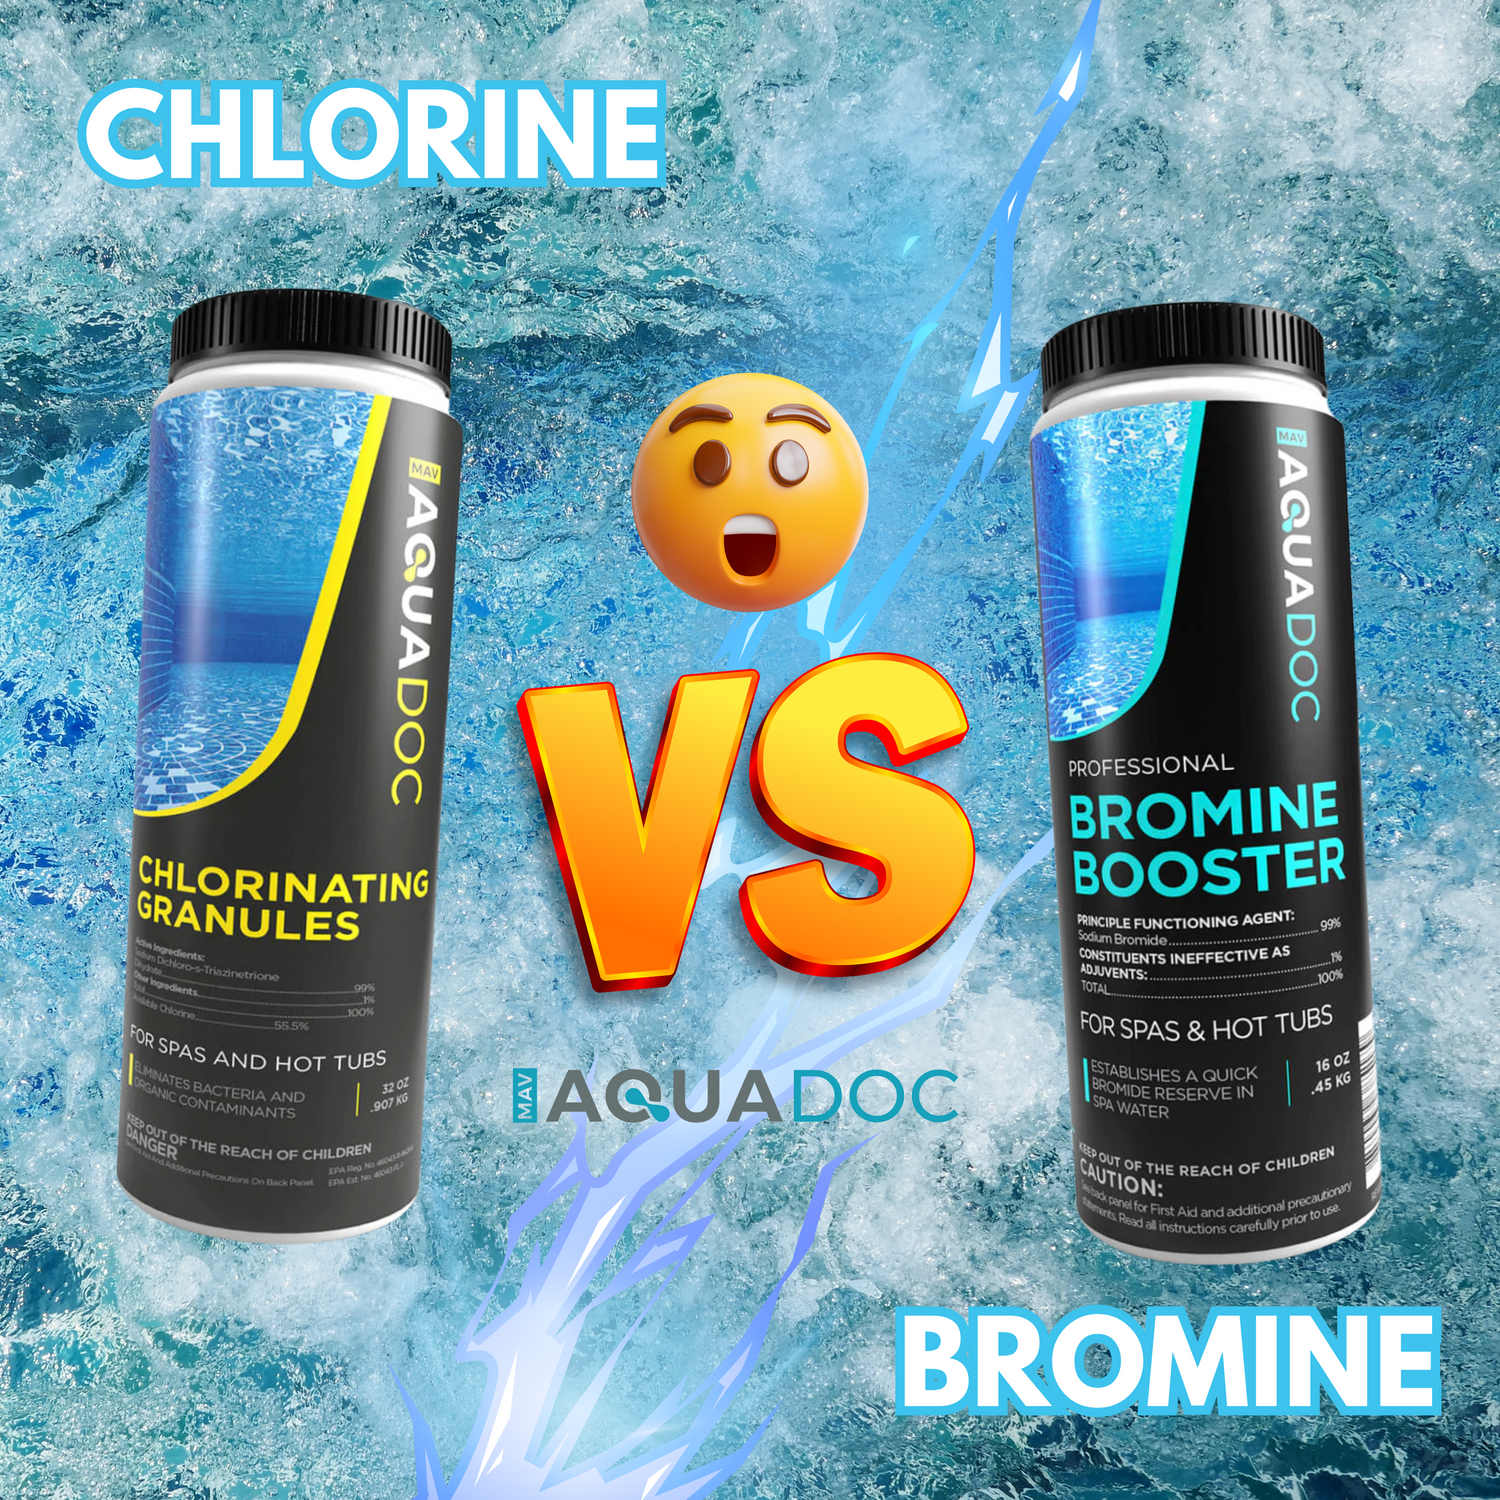  "Chlorine's punch vs. bromine's chill: Finding the perfect hot tub sanitizer personality for your spa haven.